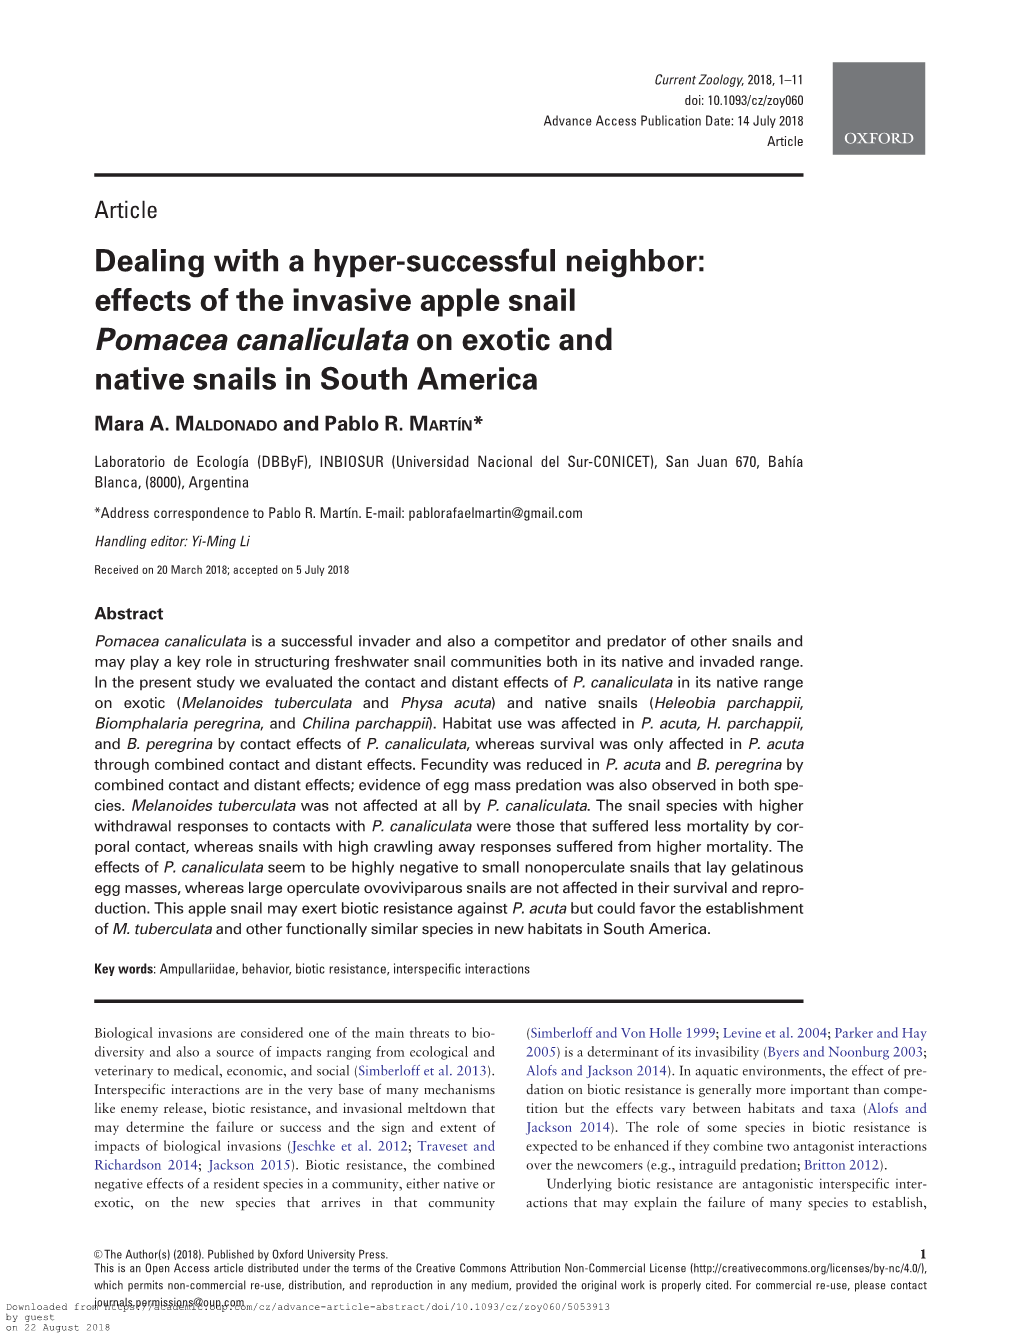 Effects of the Invasive Apple Snail Pomacea Canaliculata on Exotic and Native Snails in South America